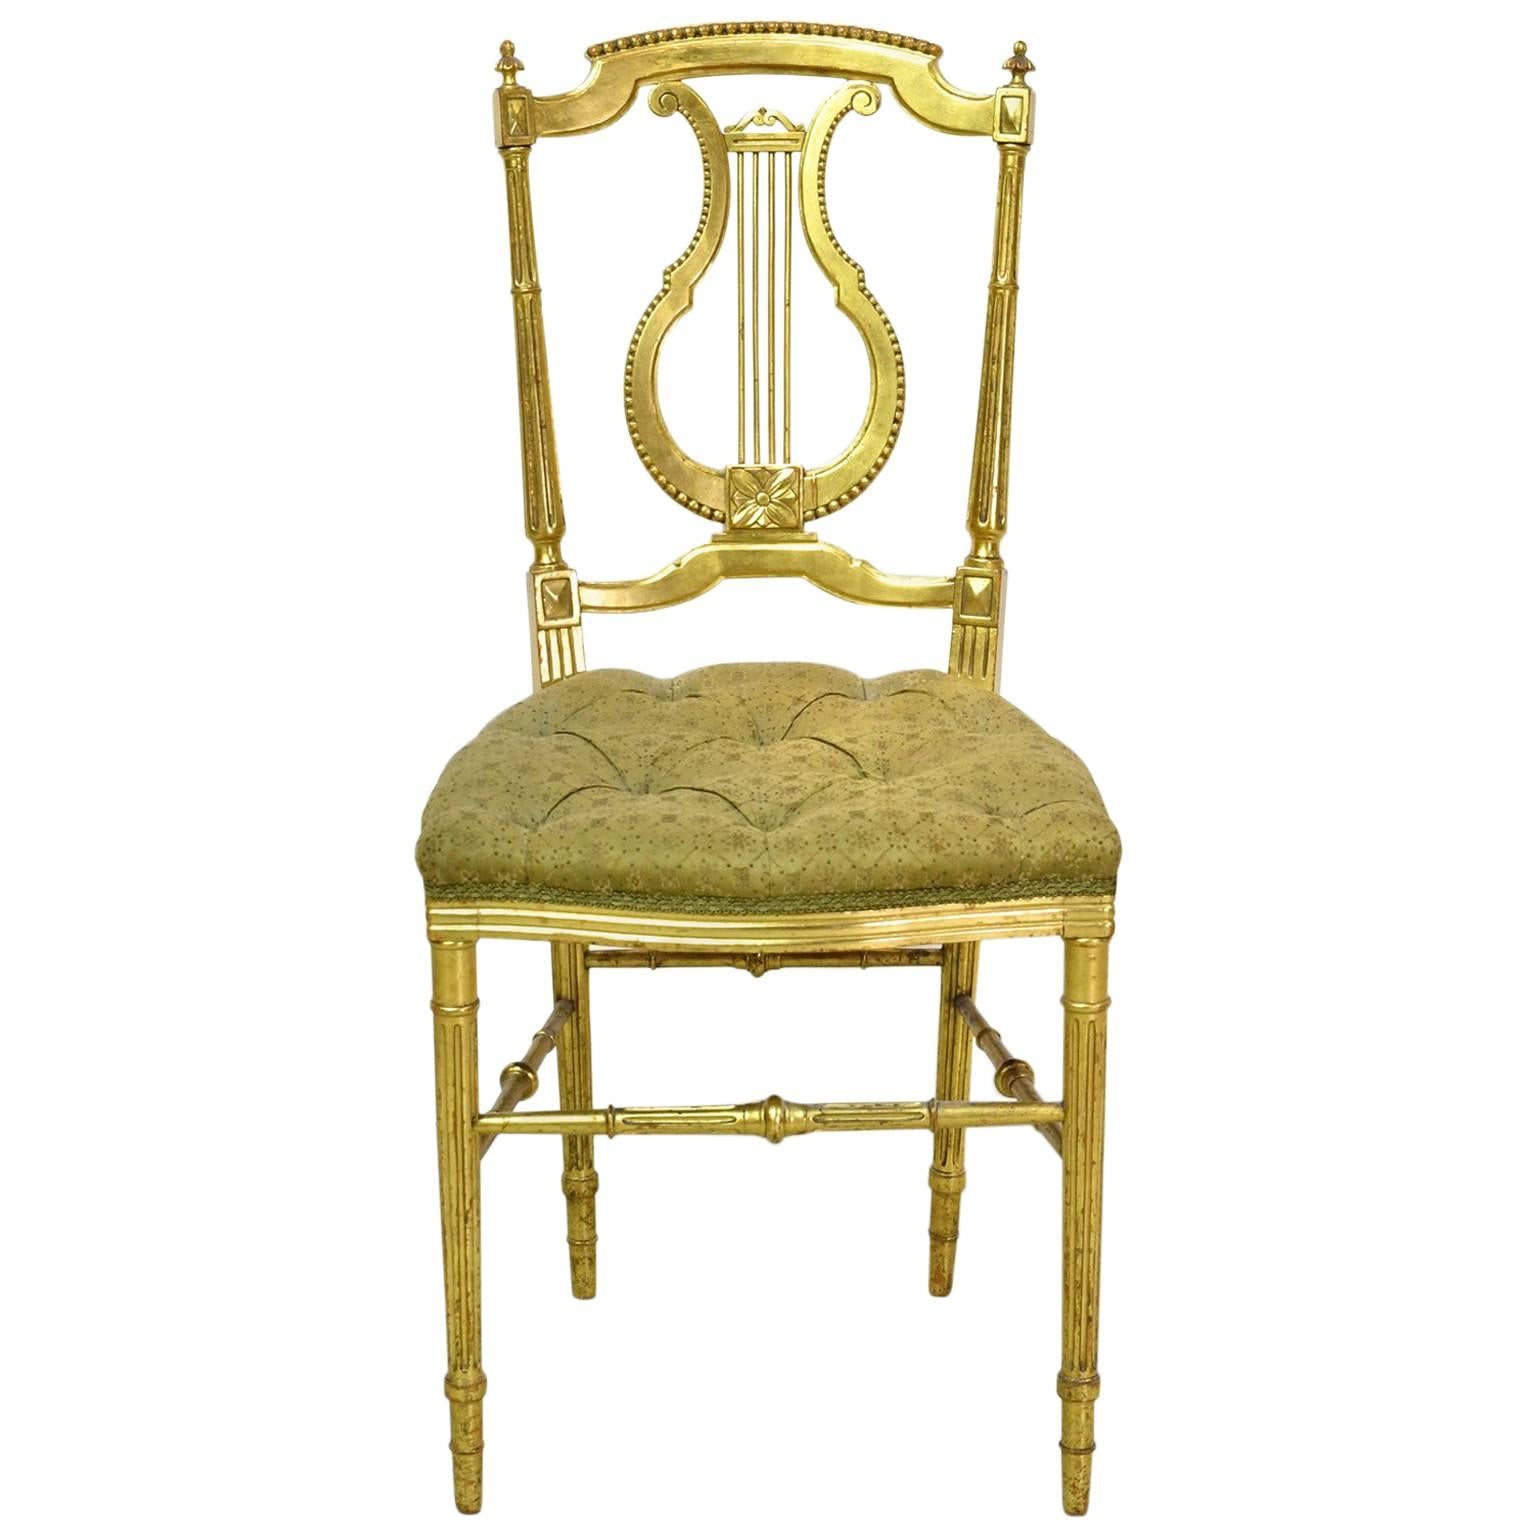 Gilded Louis XVI Style Chair w/ Lyre-Back & Upholstered Seat, France, ca. 1910